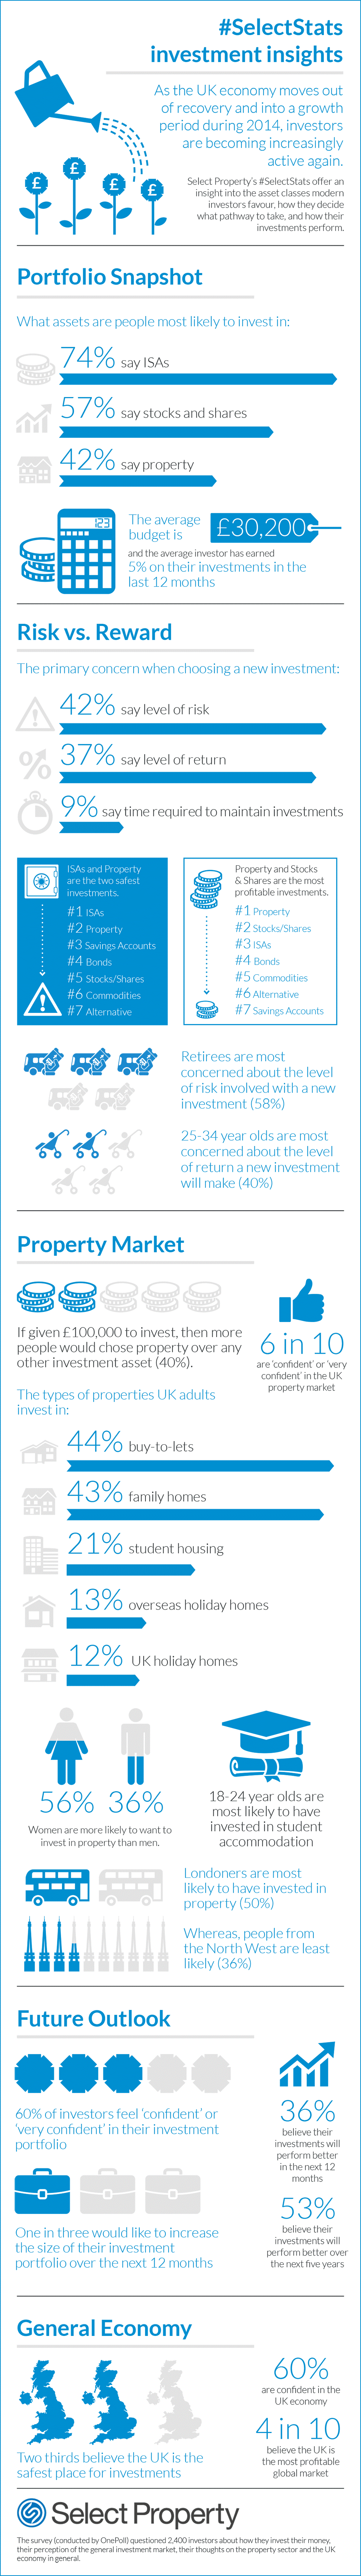 Select Property Investor Insights Infographic